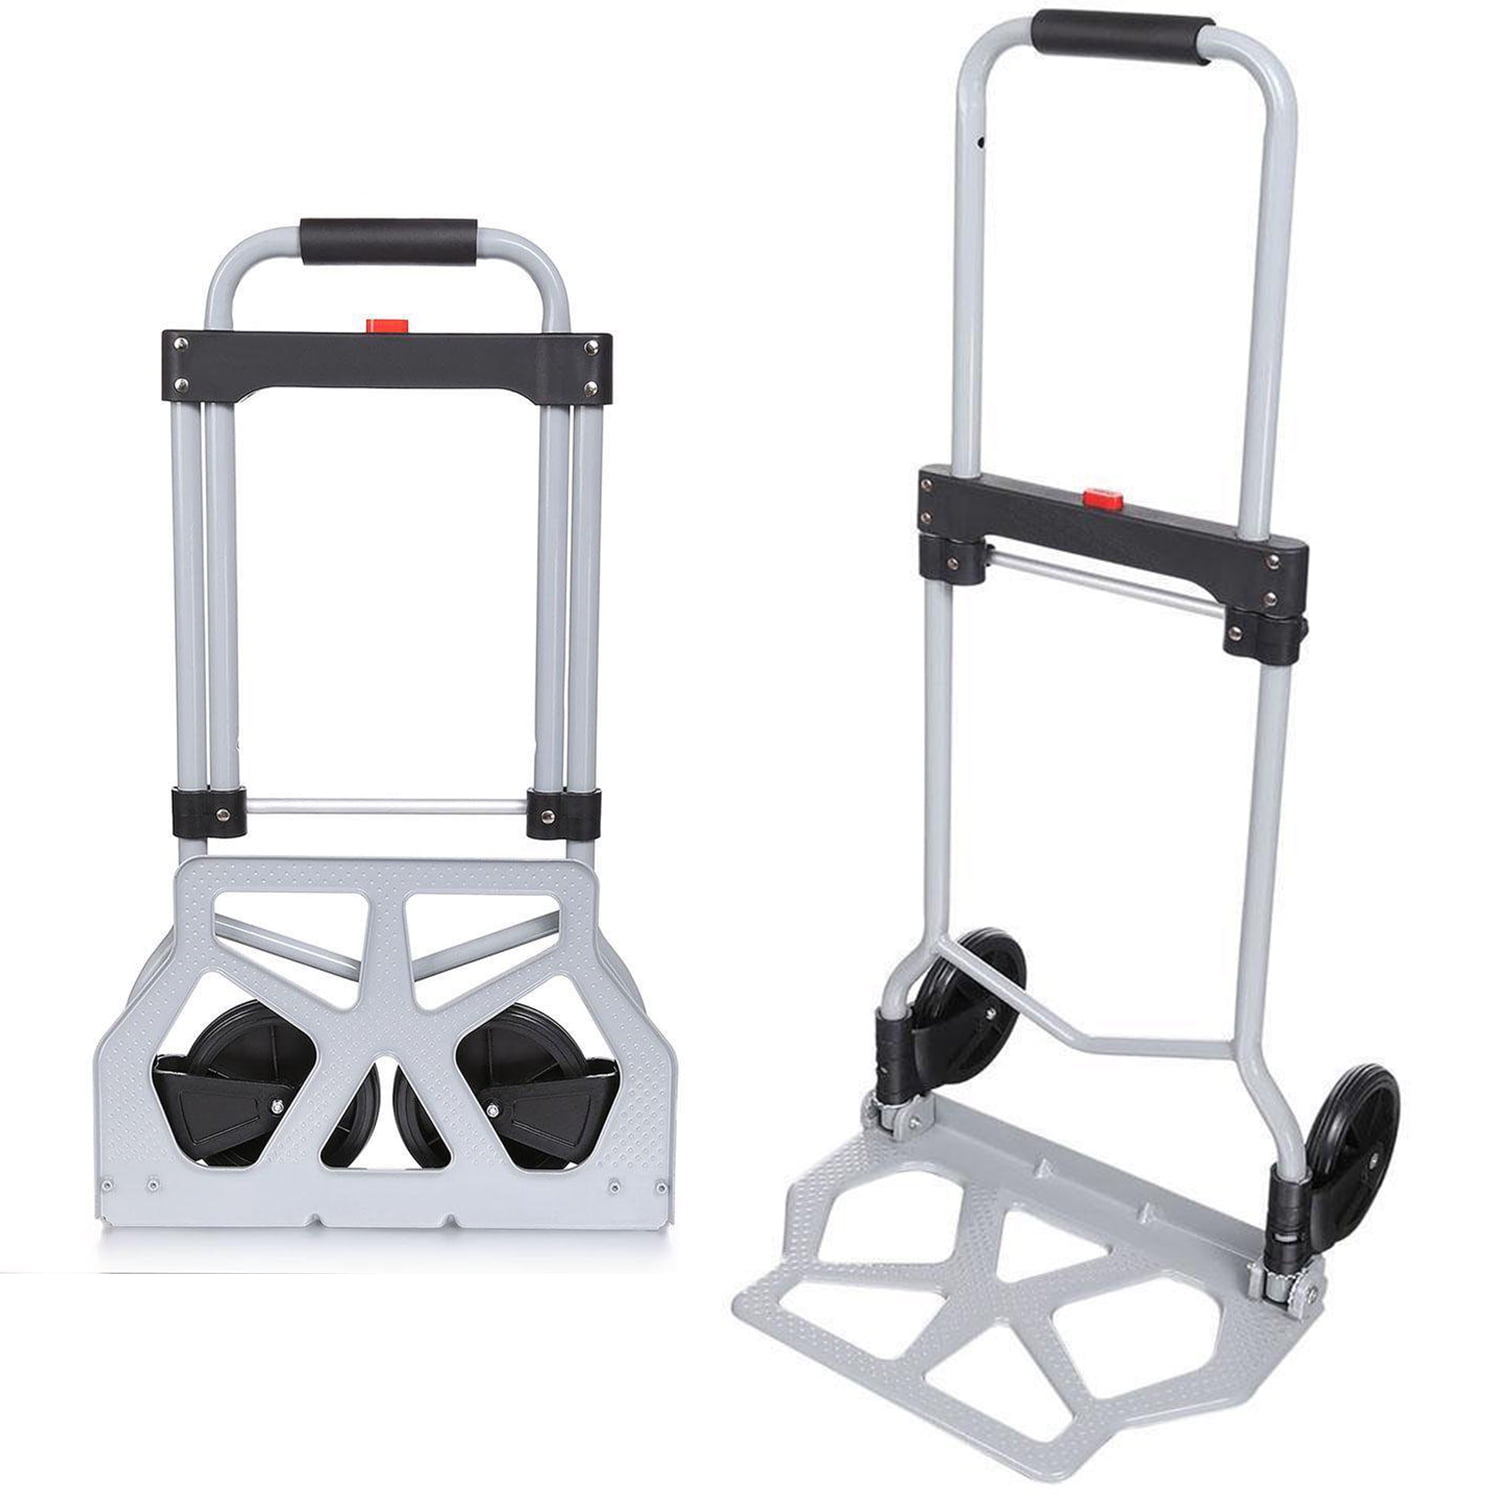 VEVOR Stair Climbing Cart, 220 lbs Capacity Hand Truck with